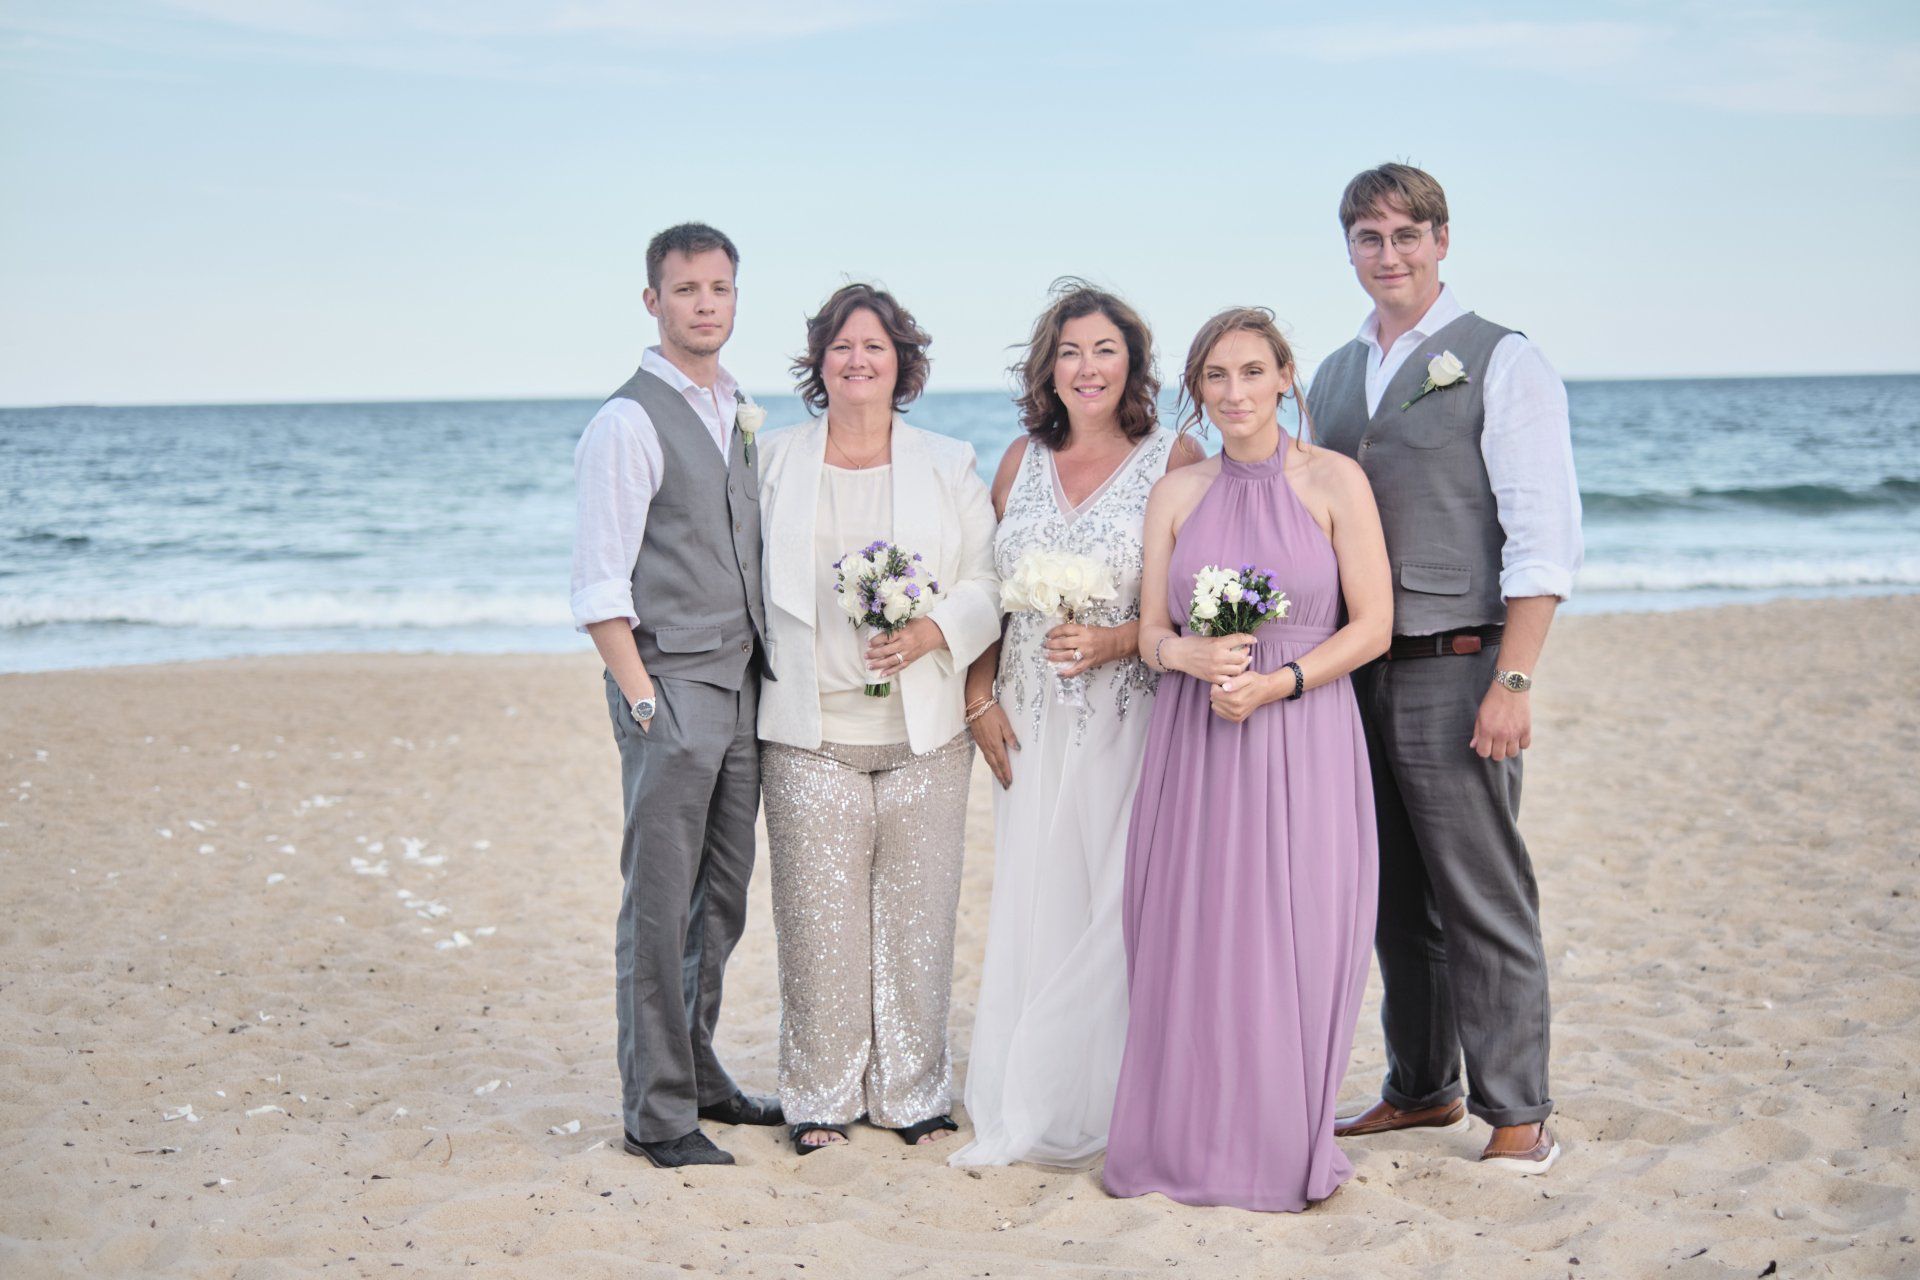 Our Family on Our Wedding Day Sea Shell Events Old Orchard Beach Maine